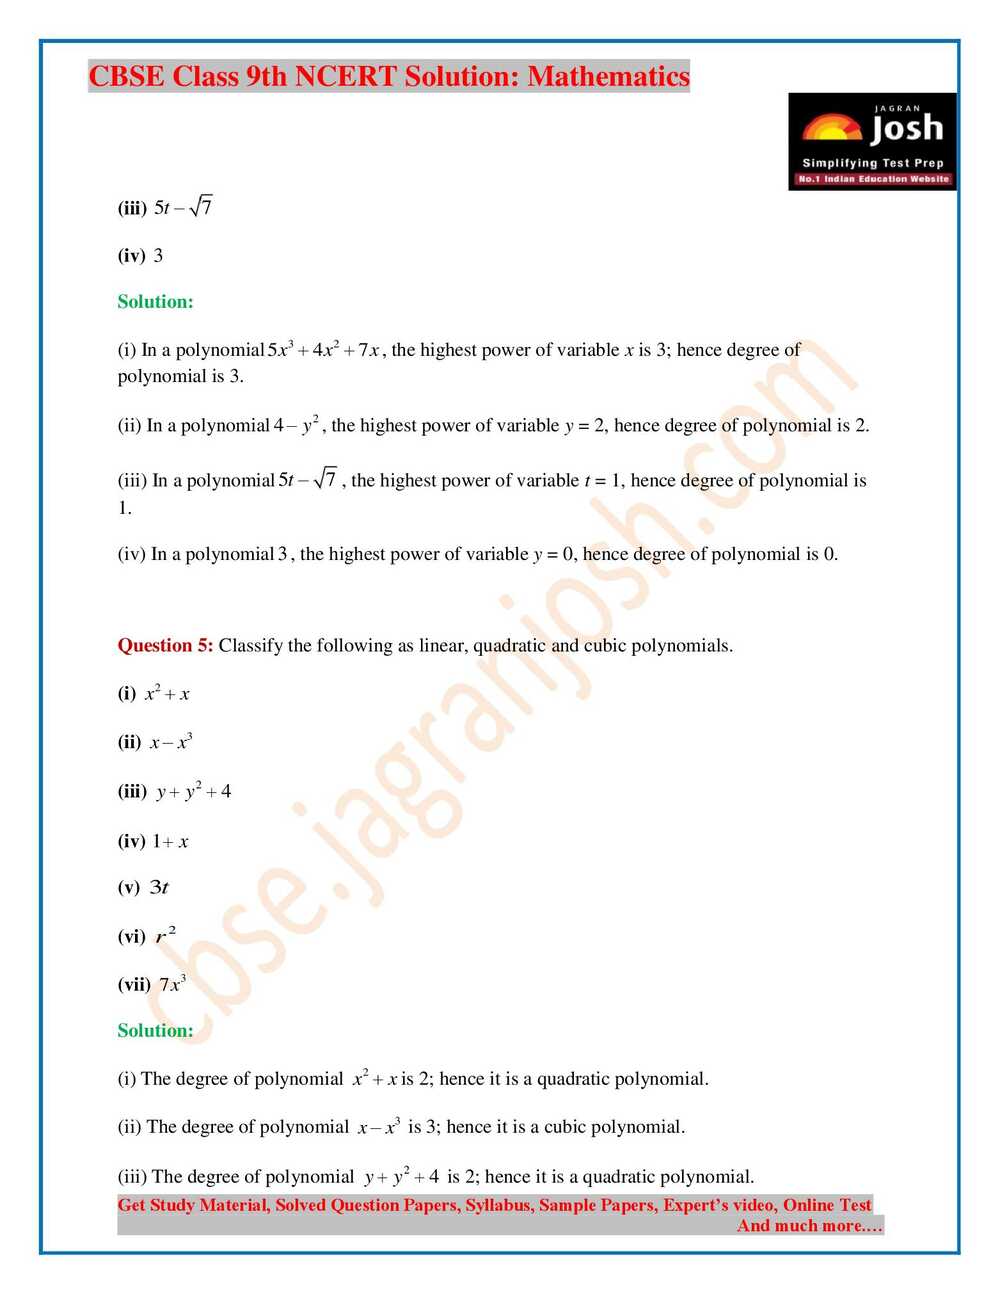 NCERT solutions for class 9 maths  Syllabus, Exam Pattern… and more